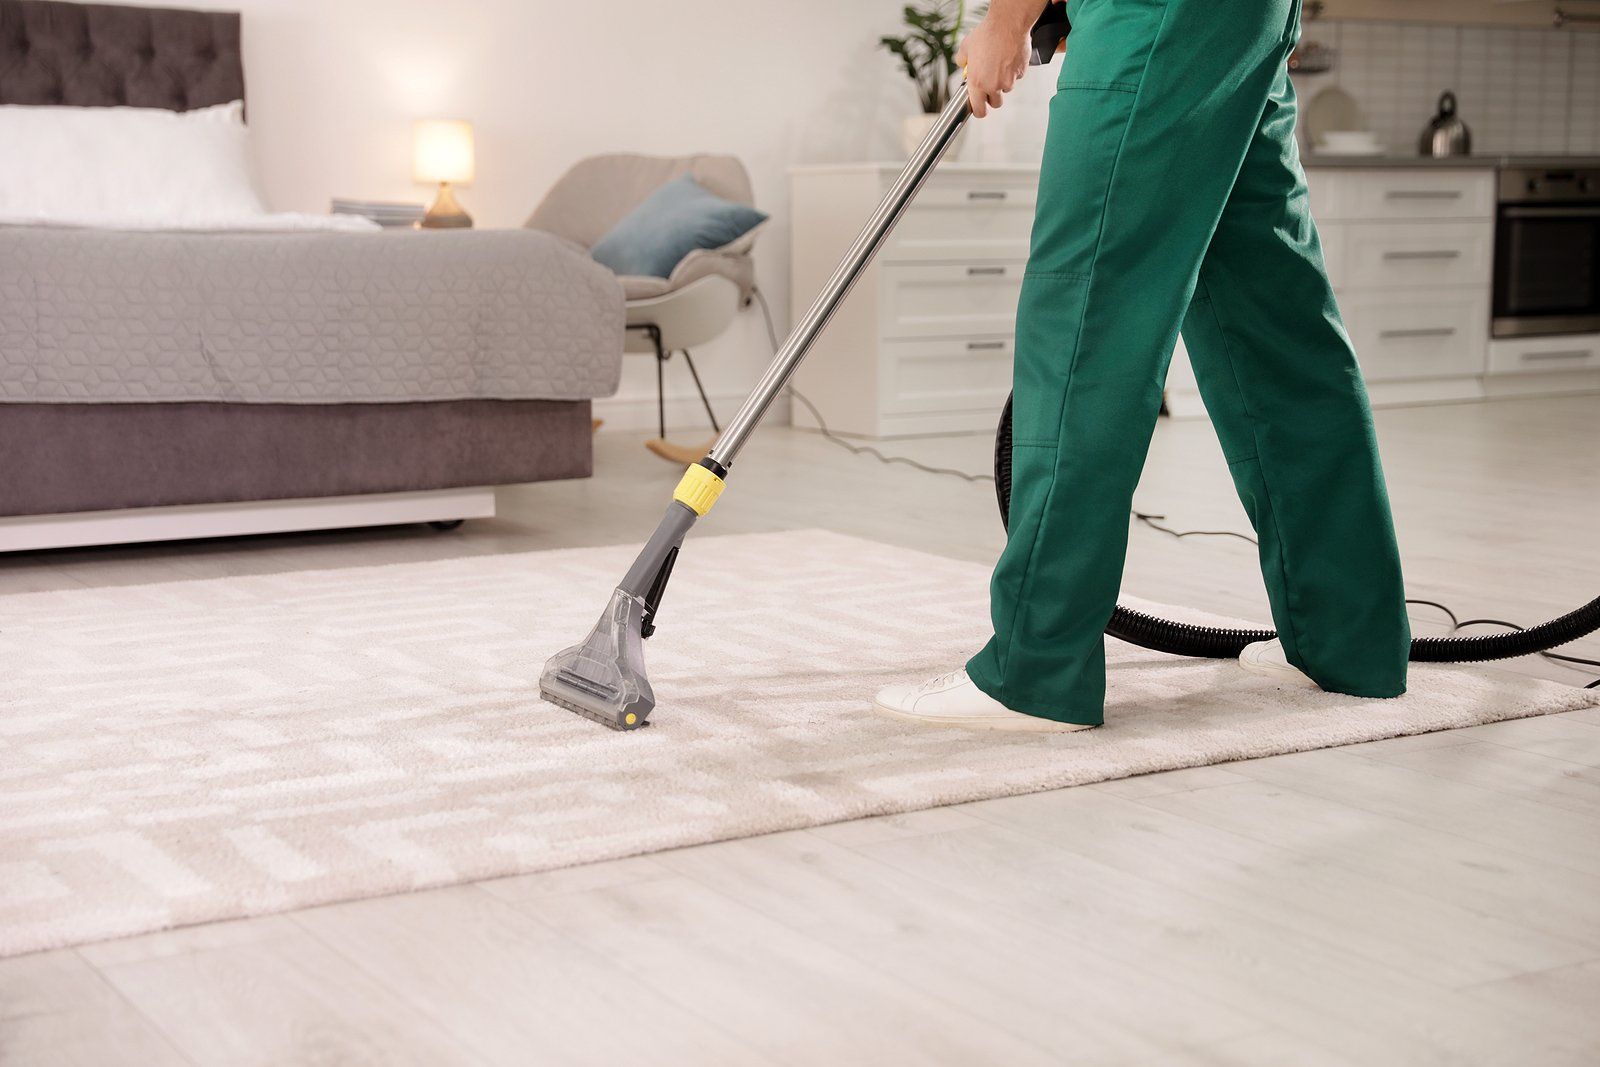 residential cleaning services in Durham, NC